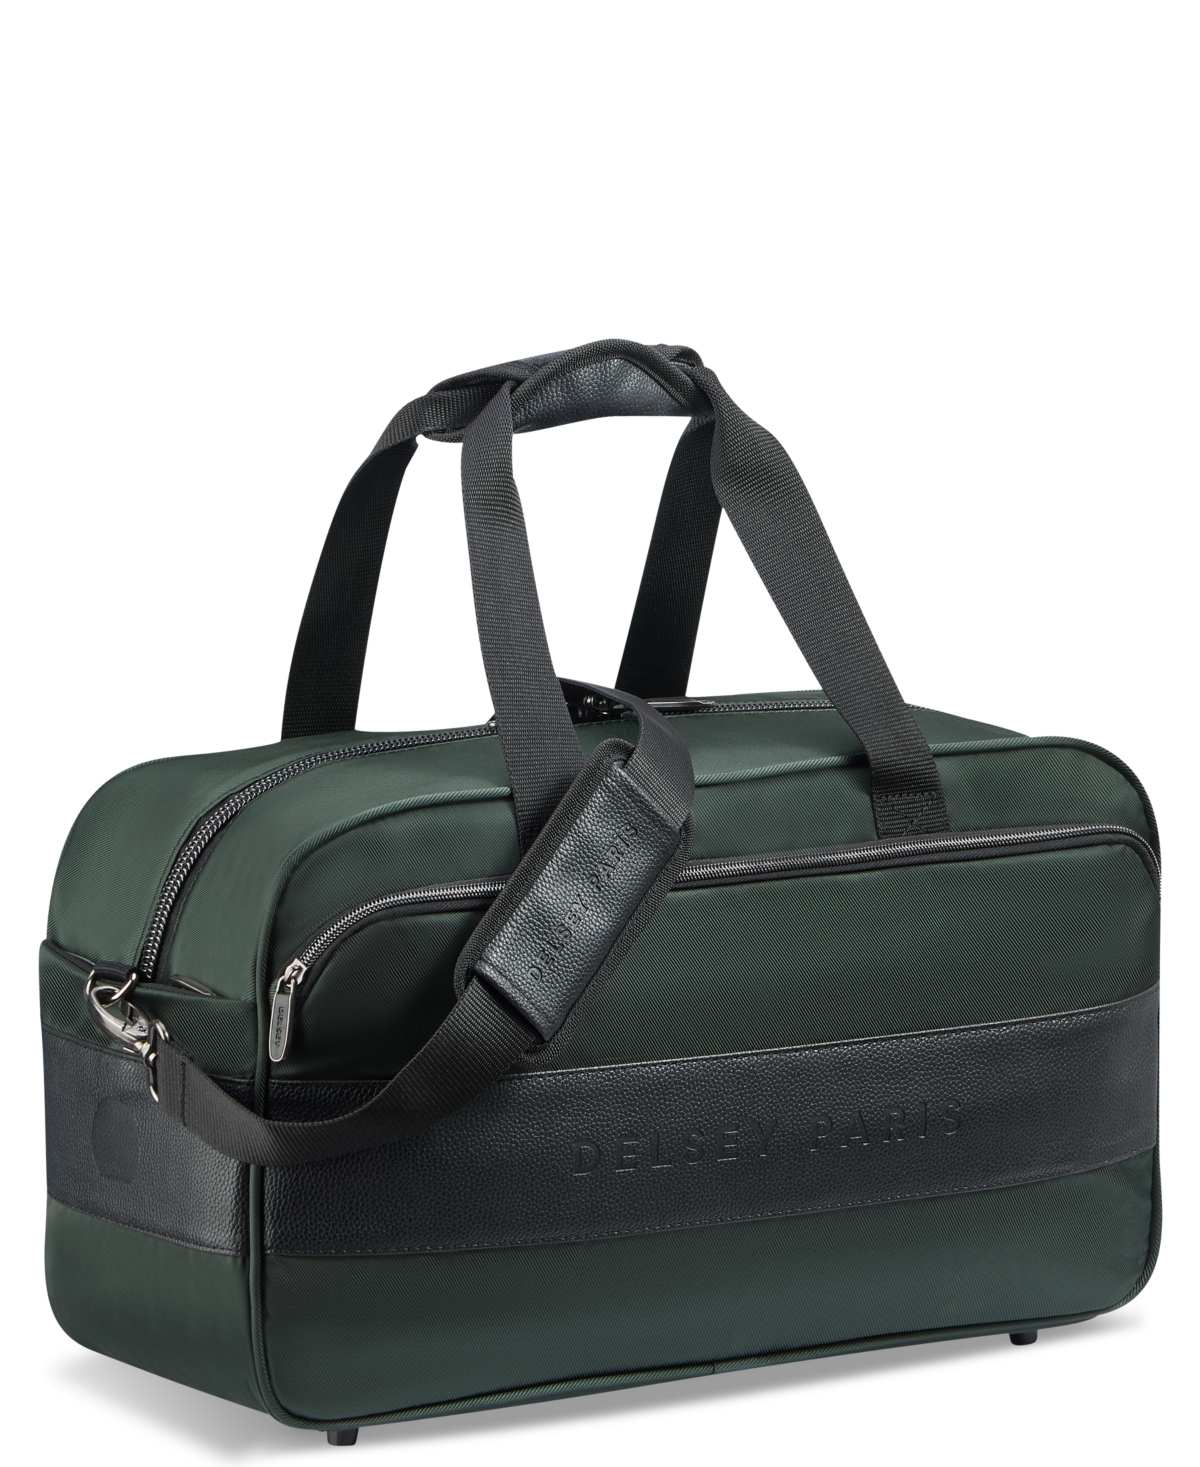 Tour Air Carry-on Duffel - Green